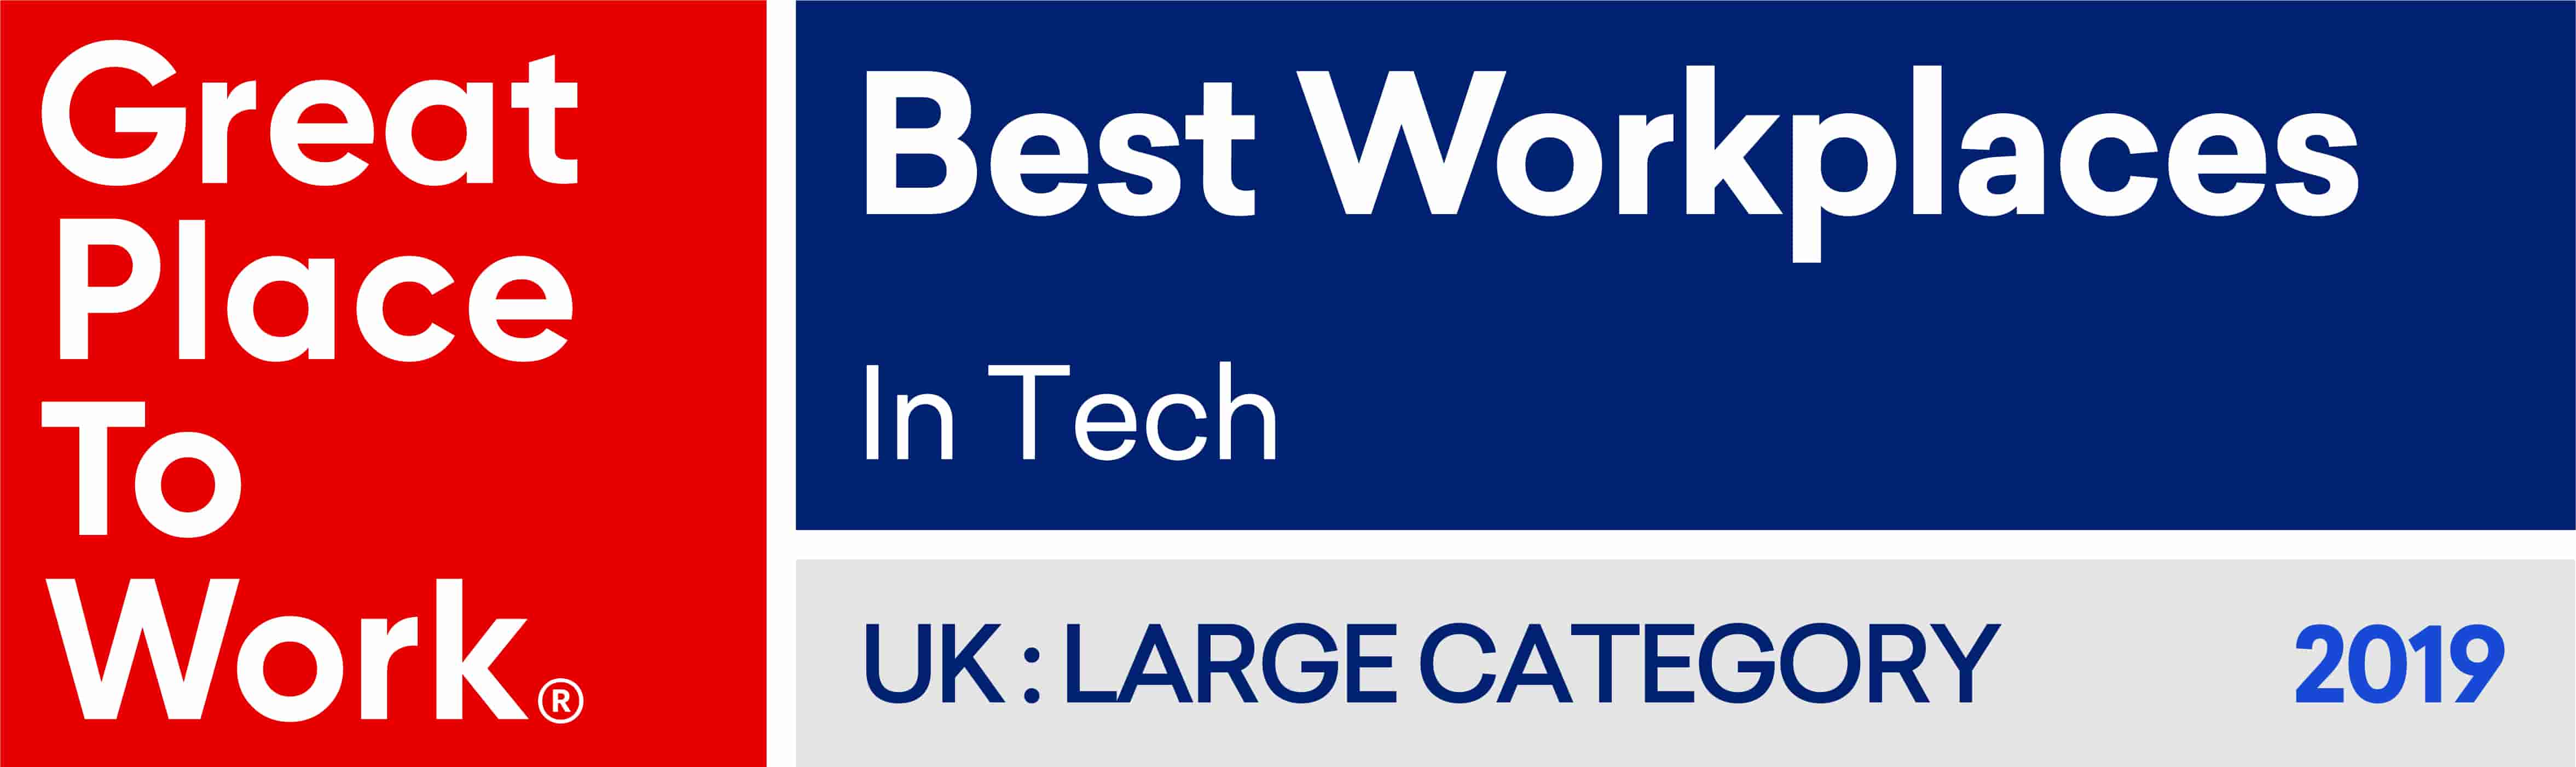 Best Workplaces in Tech - UK Large Category 2019 badge